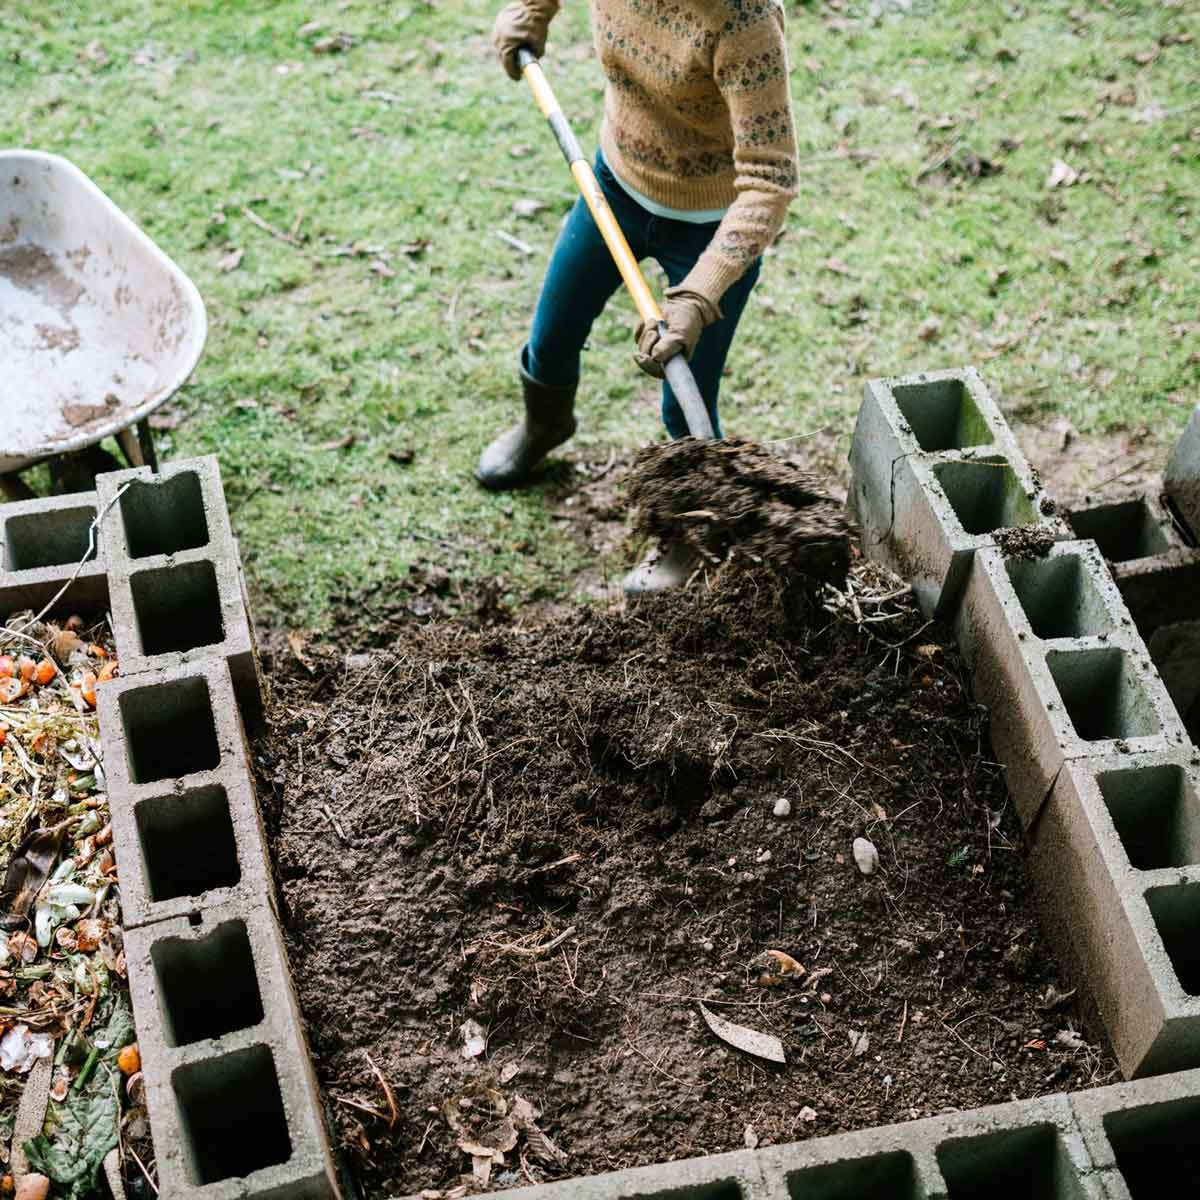 https://www.familyhandyman.com/wp-content/uploads/2020/07/scooping-compost-GettyImages-1200151530.jpg?fit=700%2C1024